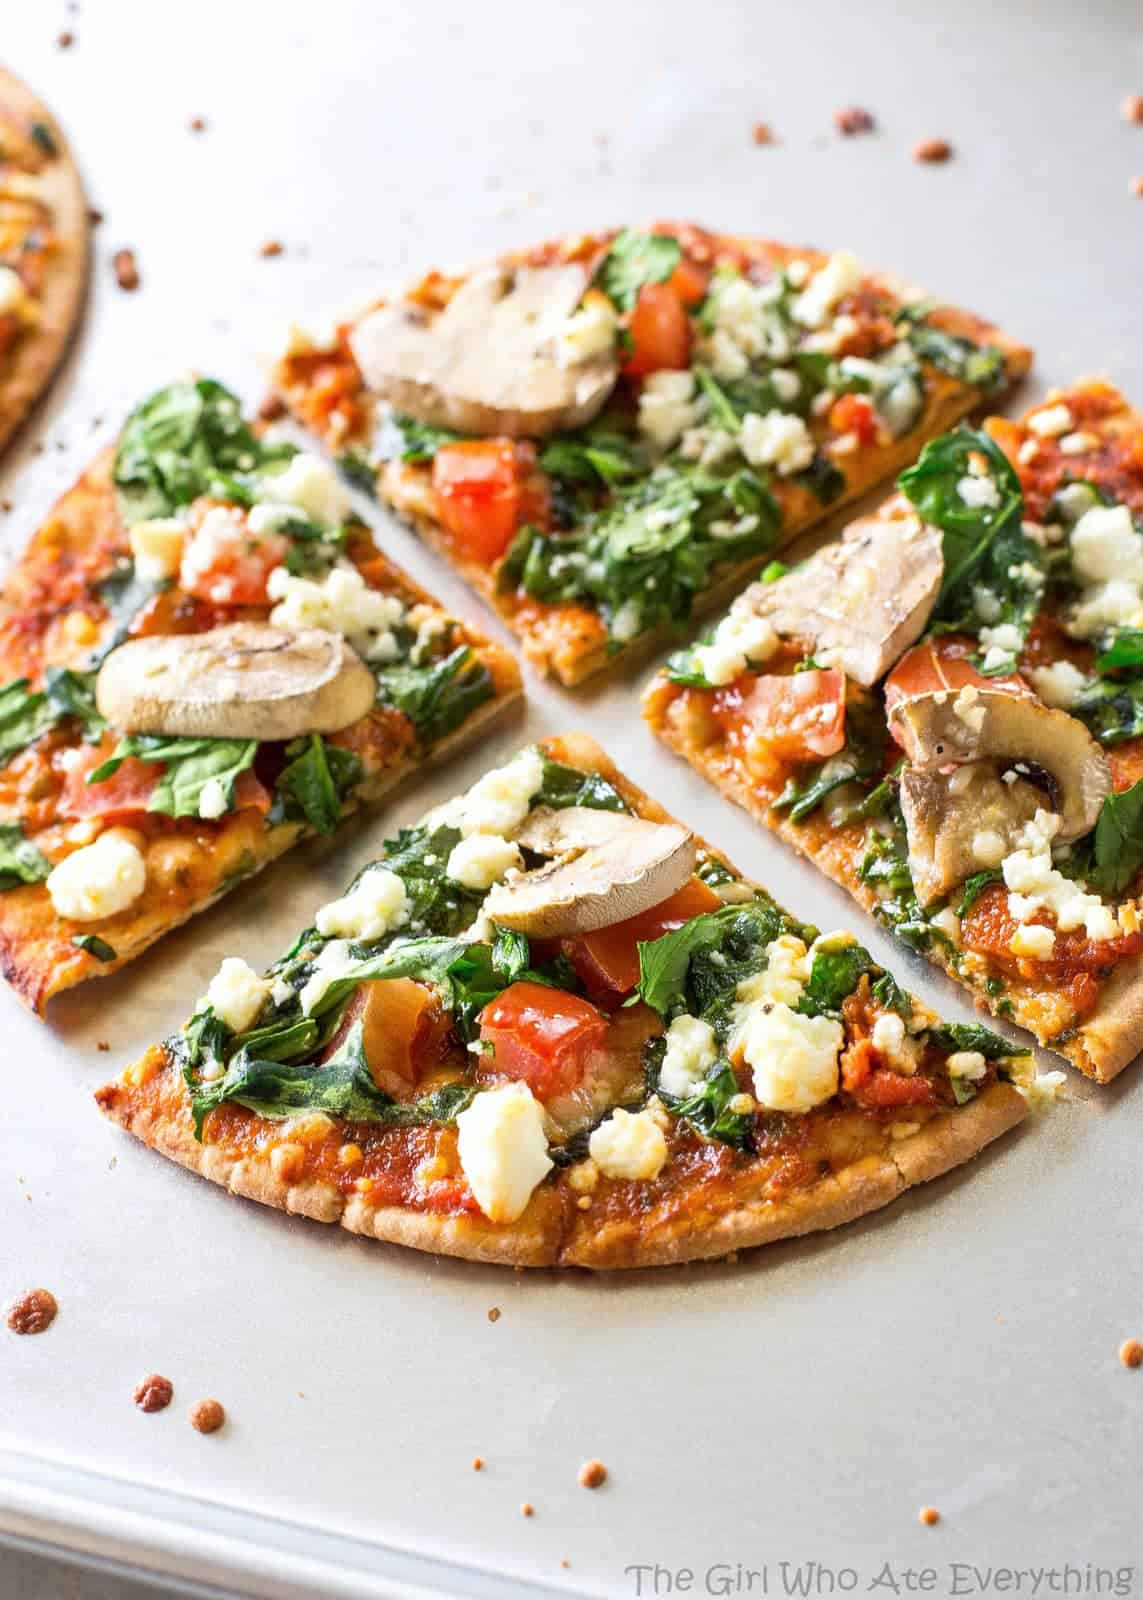 Spinach Feta Pita Pizza The Girl Who Ate Everything,Italian Word For Grandma